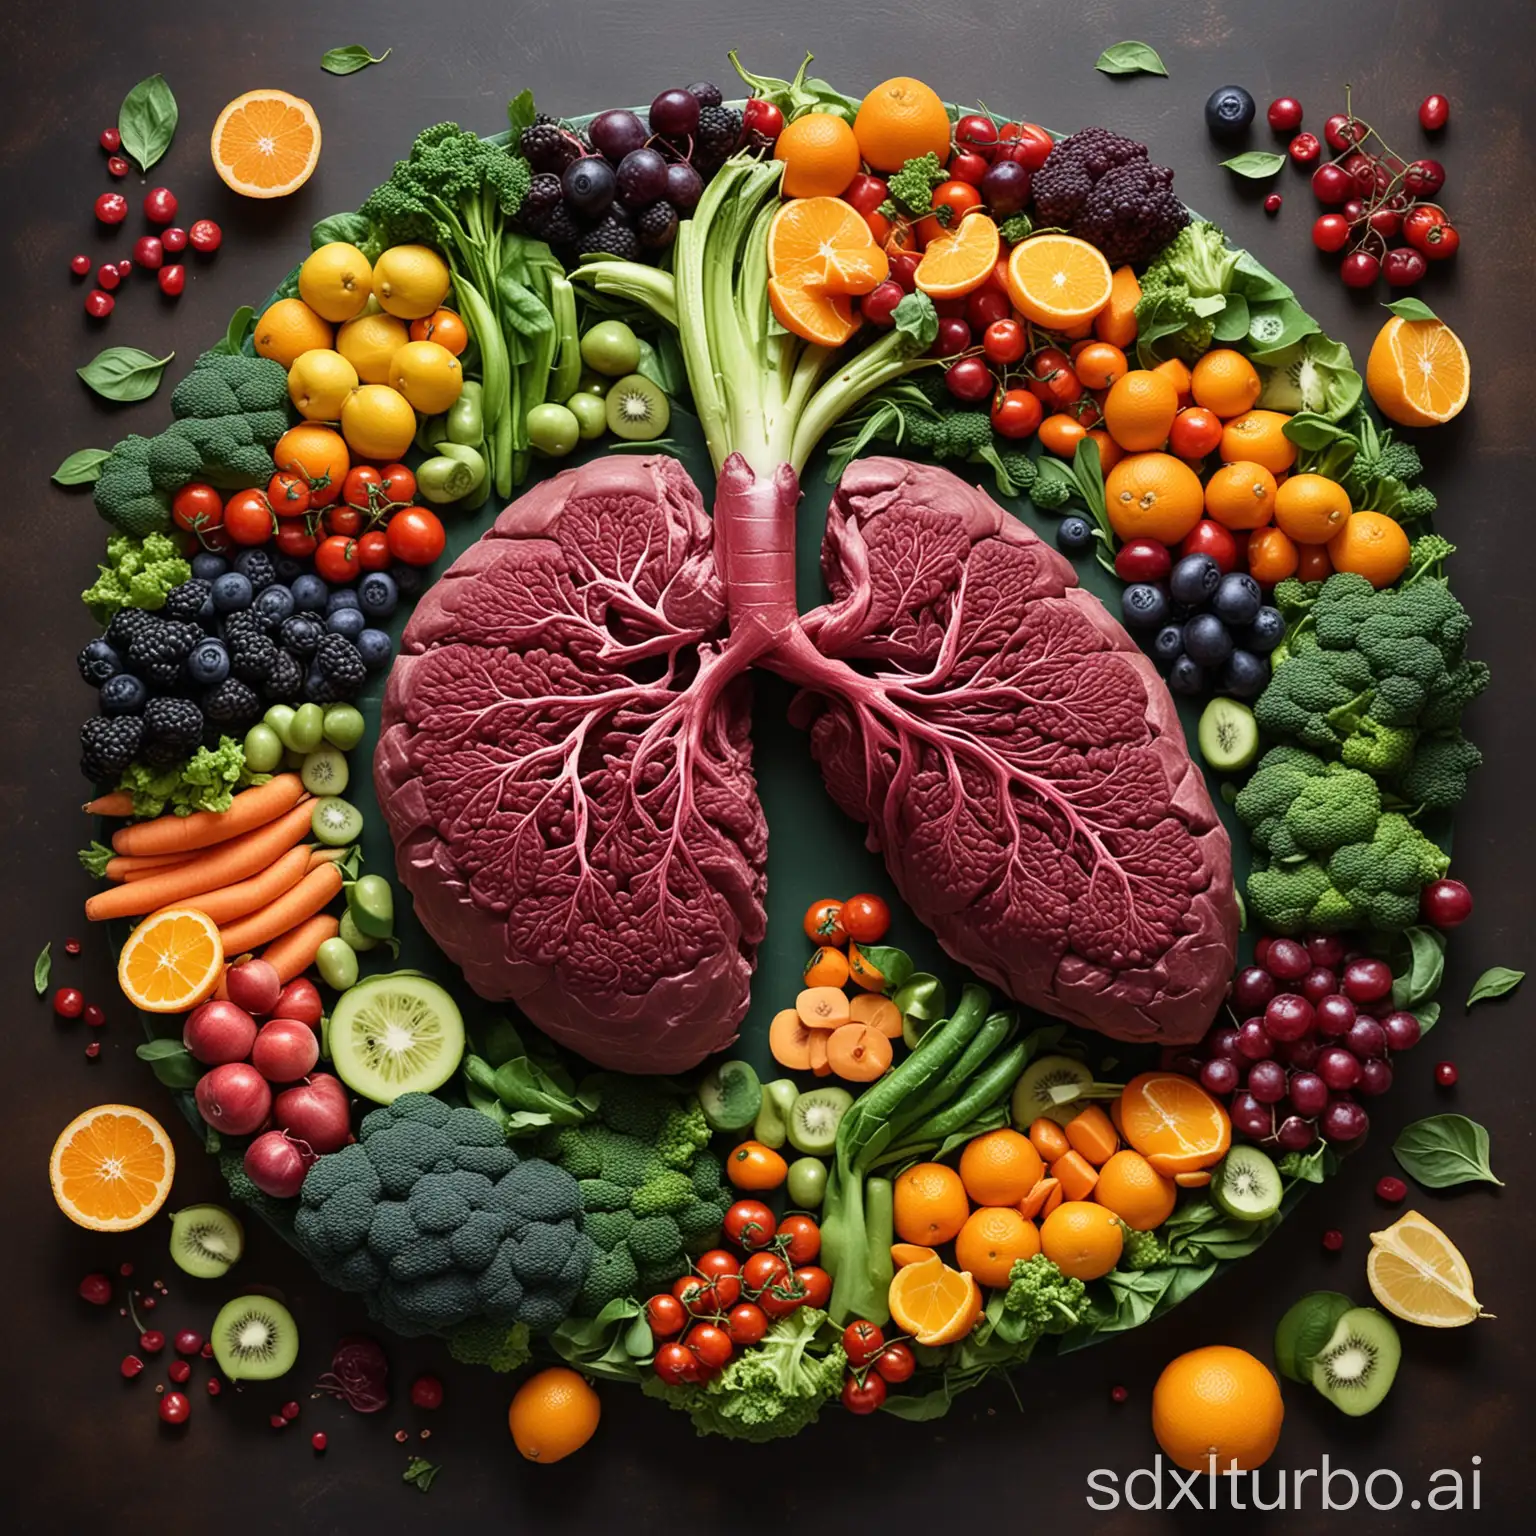 Vibrant-Liver-Surrounded-by-Detoxifying-Fruits-and-Vegetables